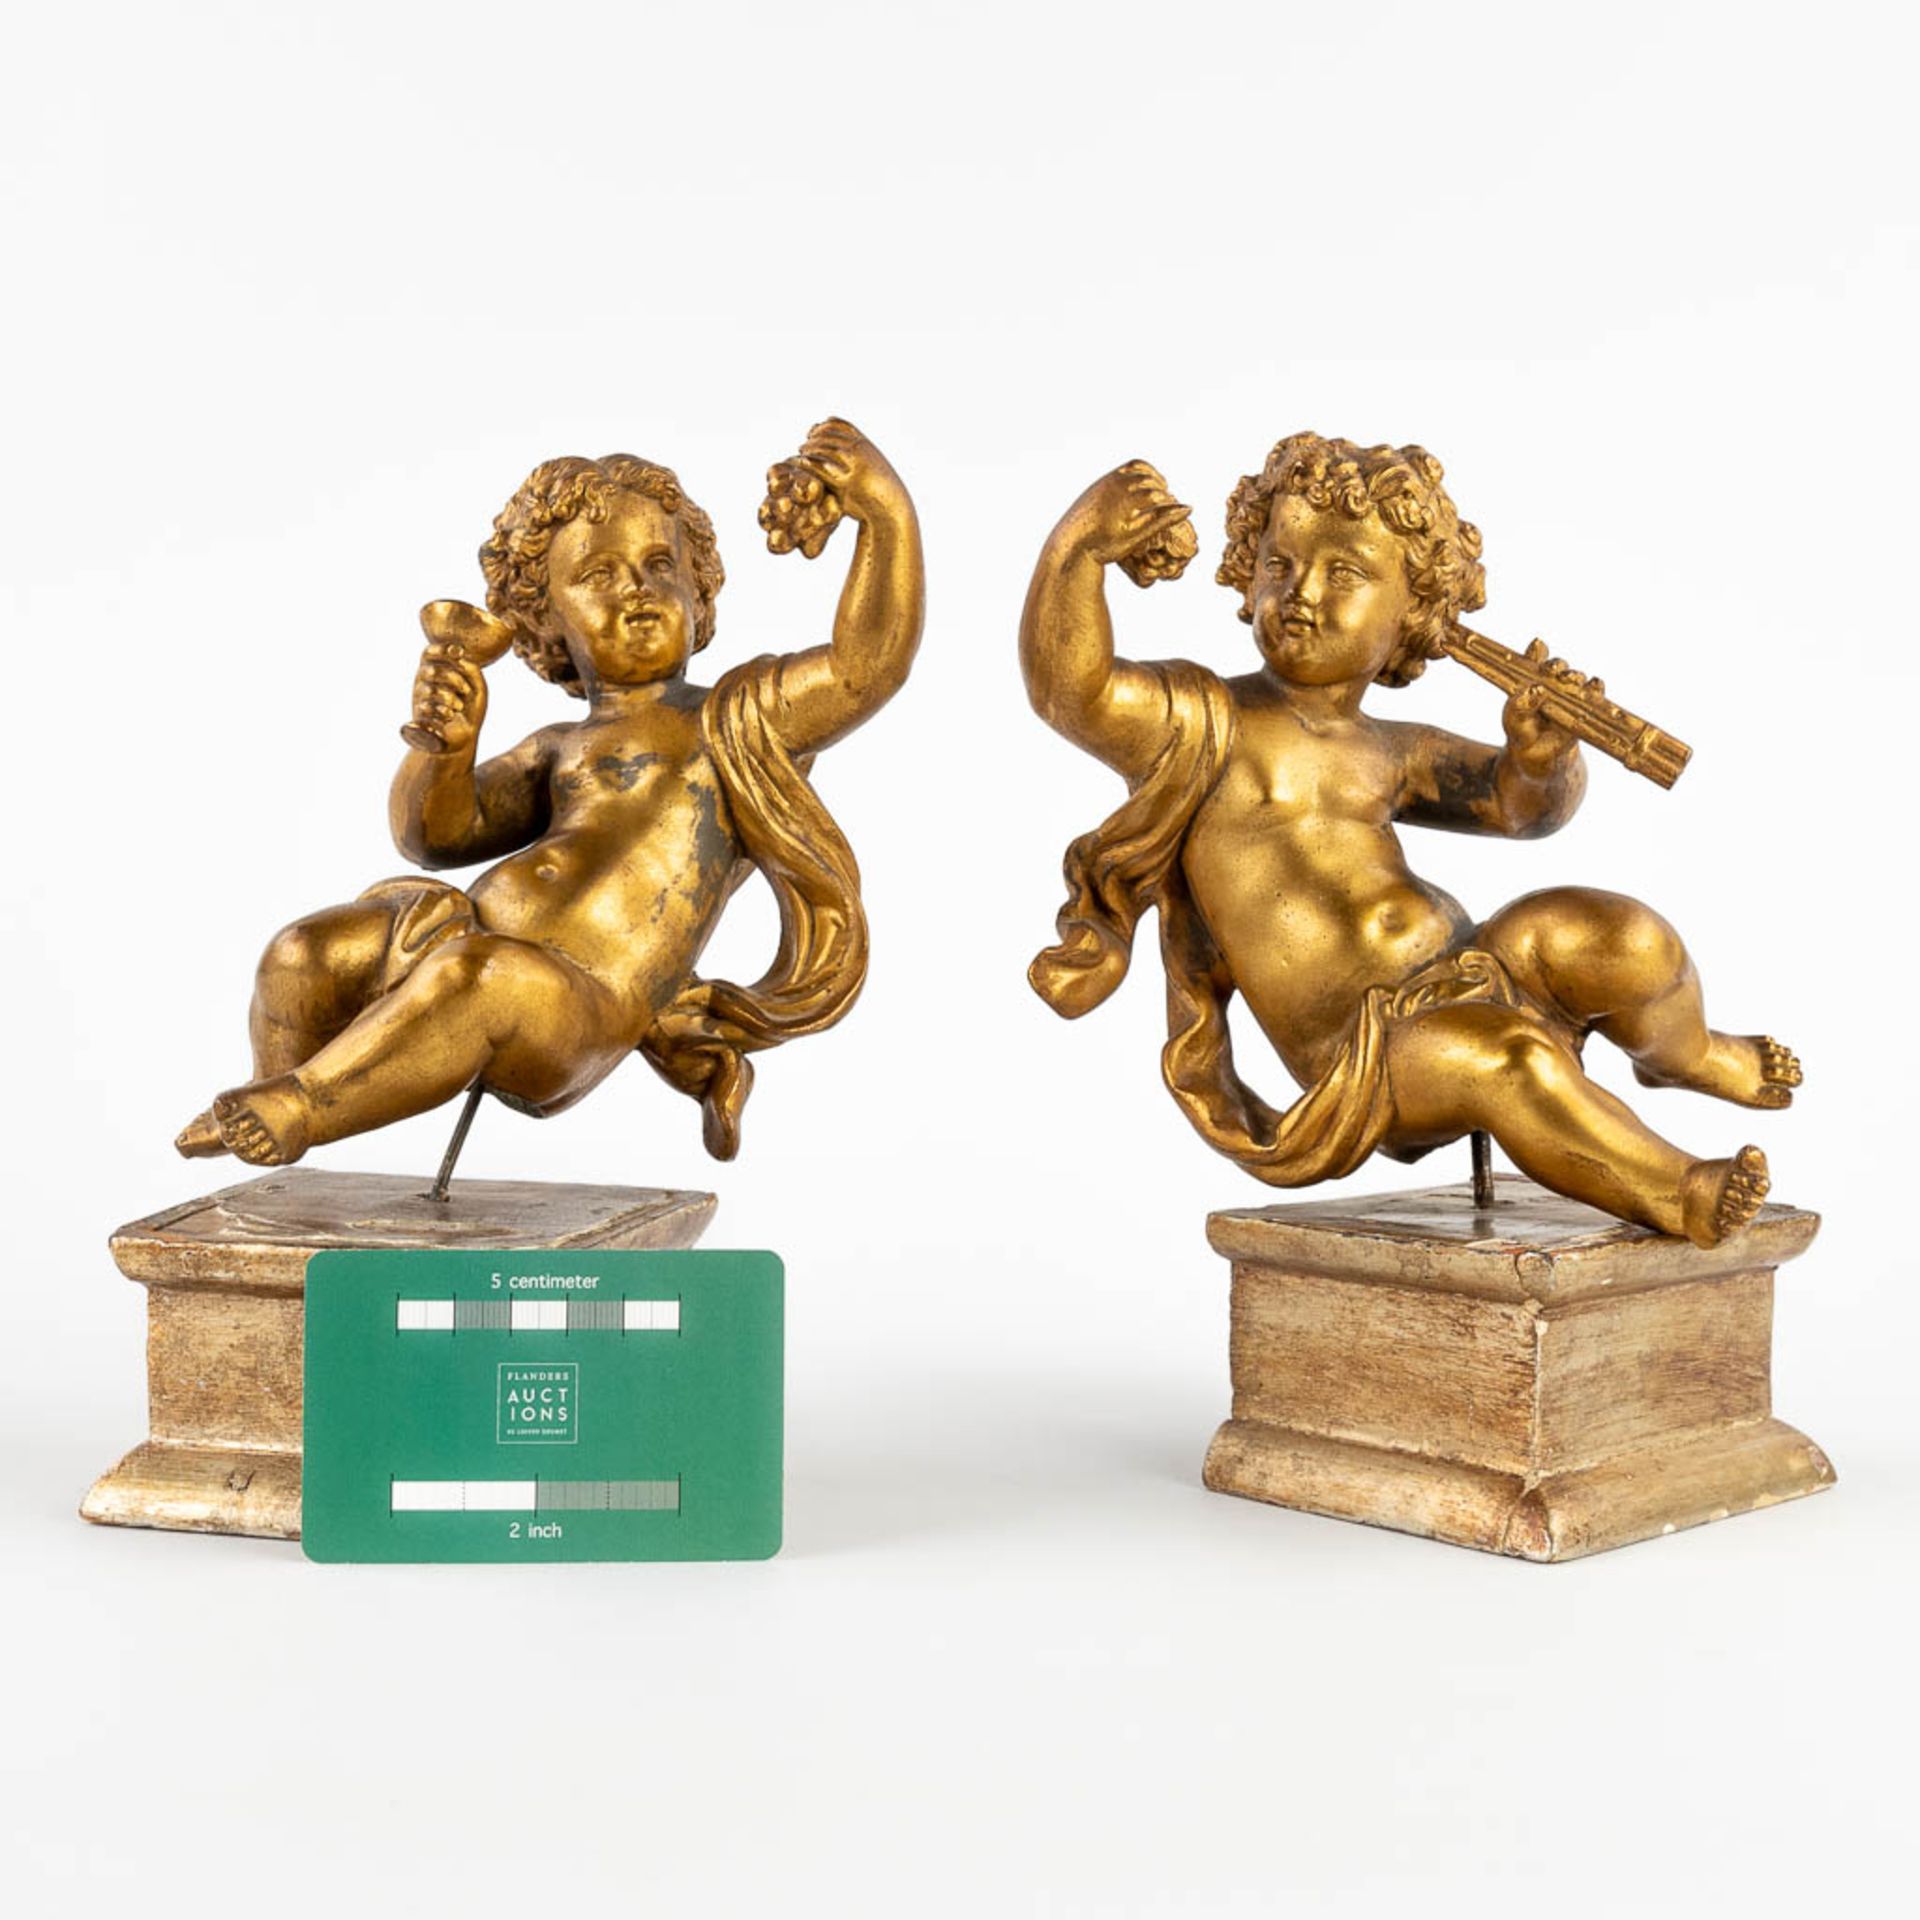 A pair of angels, gilt spelter and mounted on a wood base. 19th C. (W:12 x H:18 cm) - Image 2 of 14